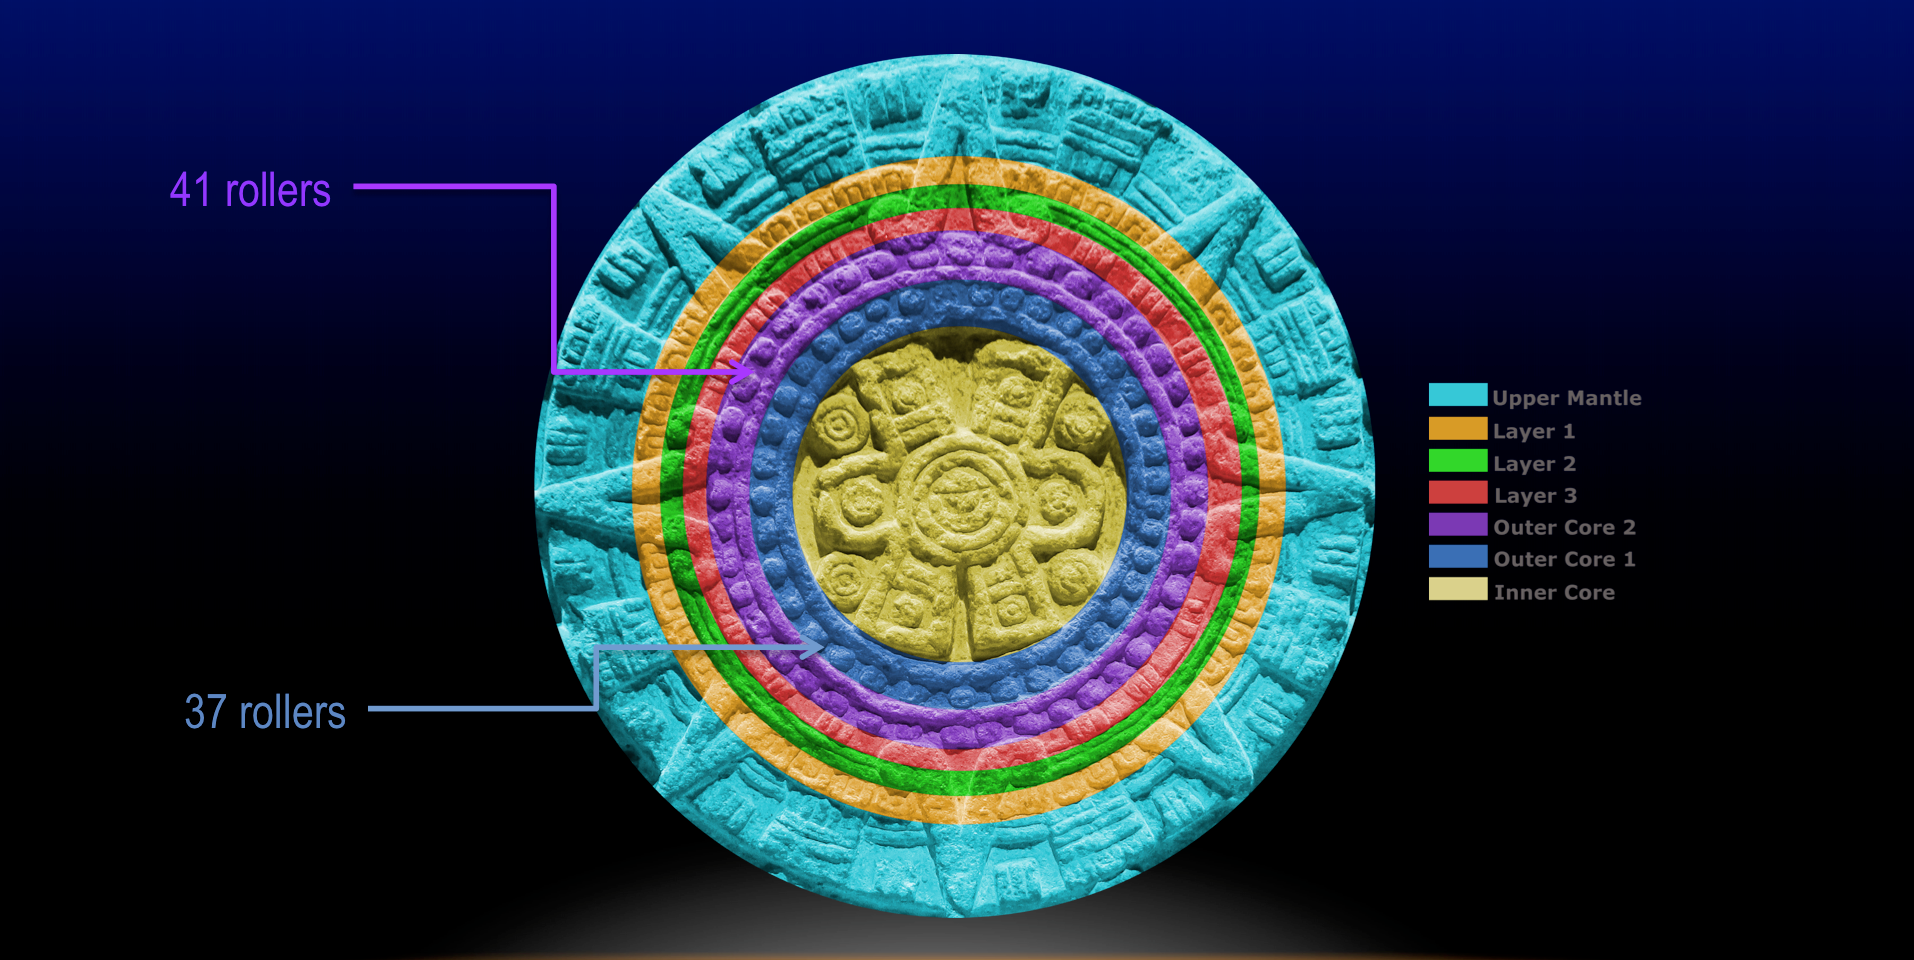 Image of the layers of the Aztec Moon by Calin Ungureanu AztecStones.com